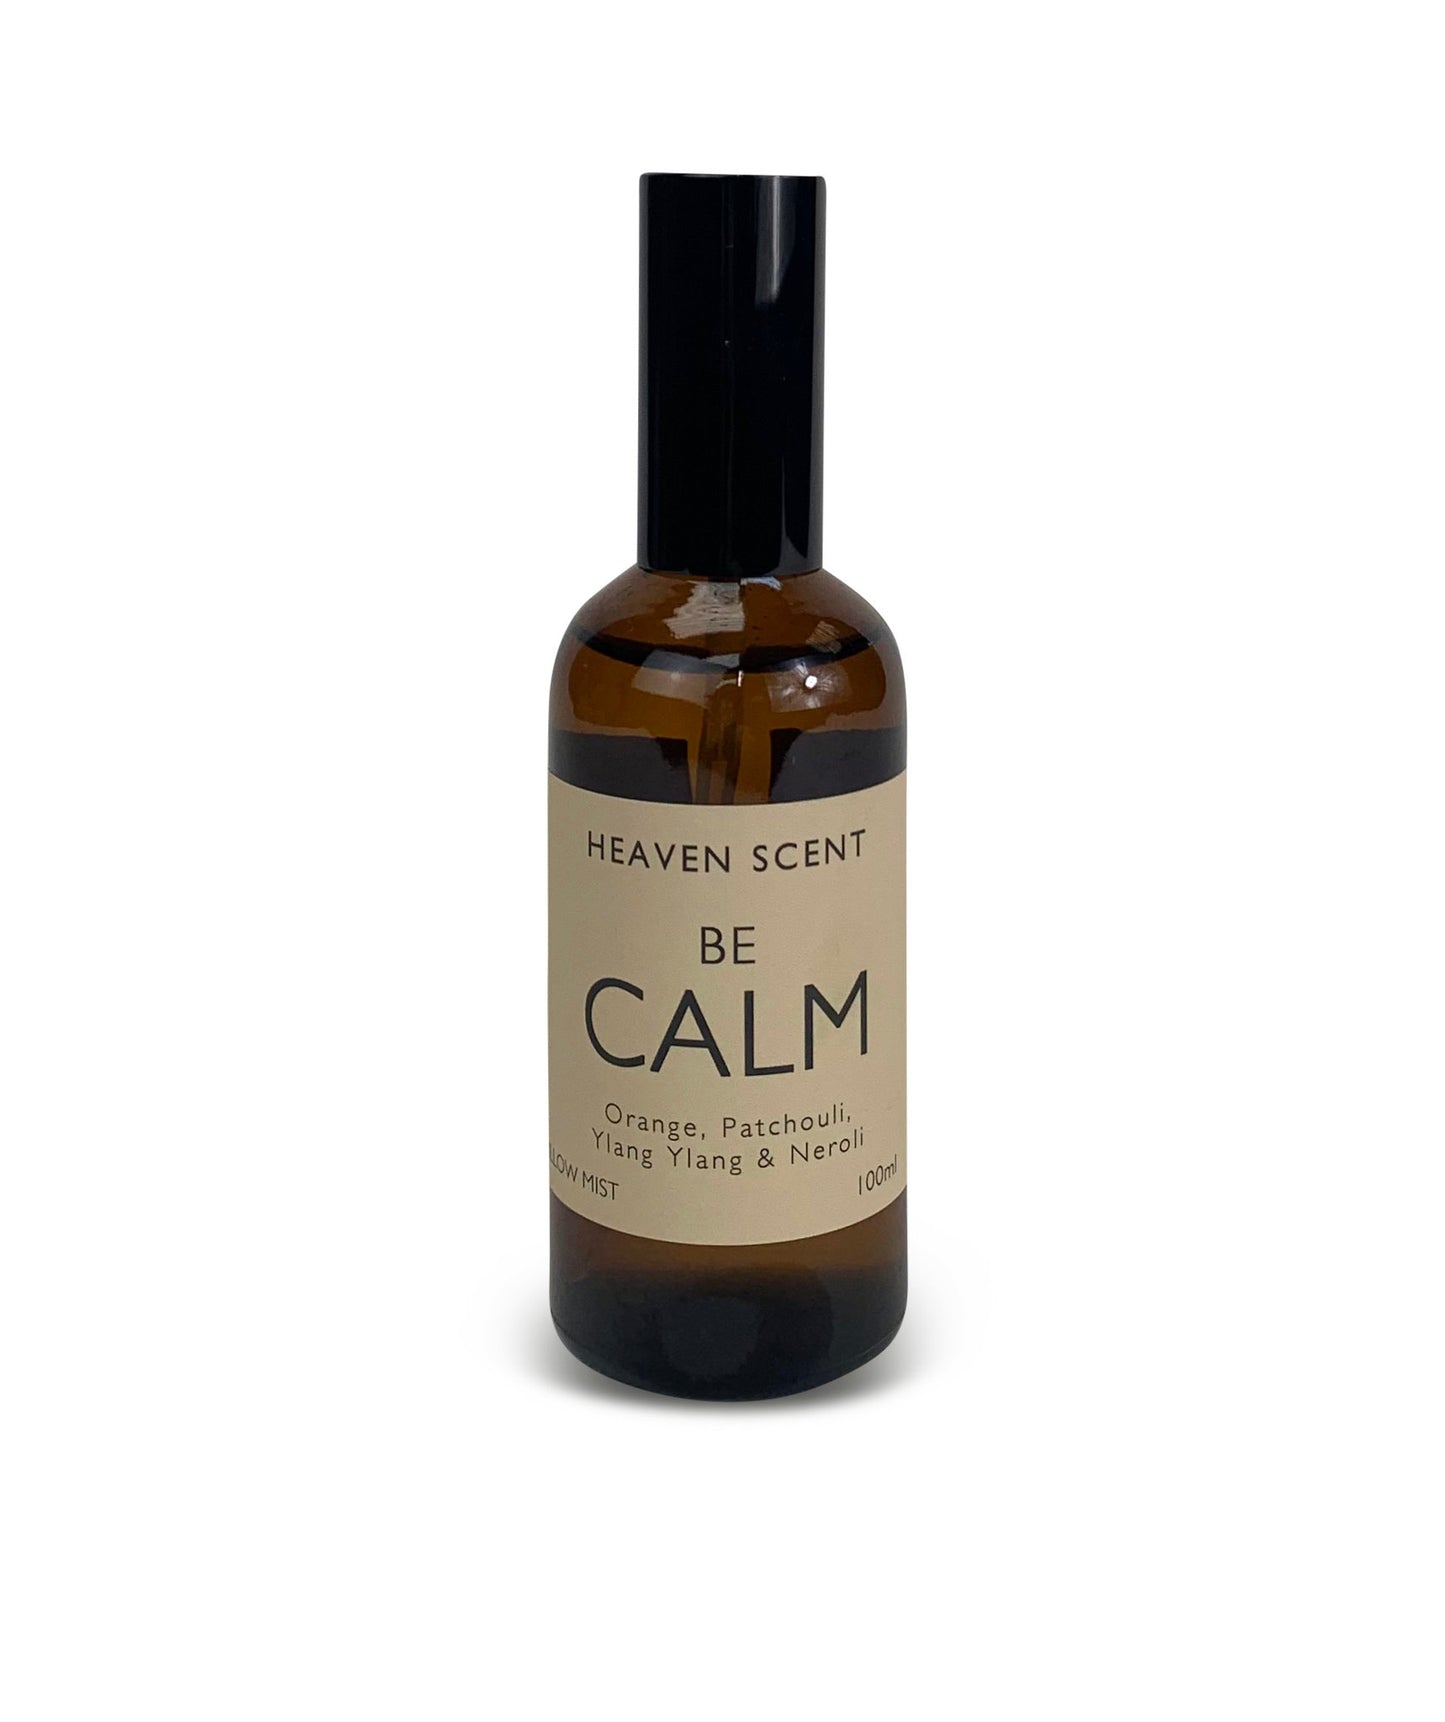 Be Calm 100ml Room Spray by Heaven Scent